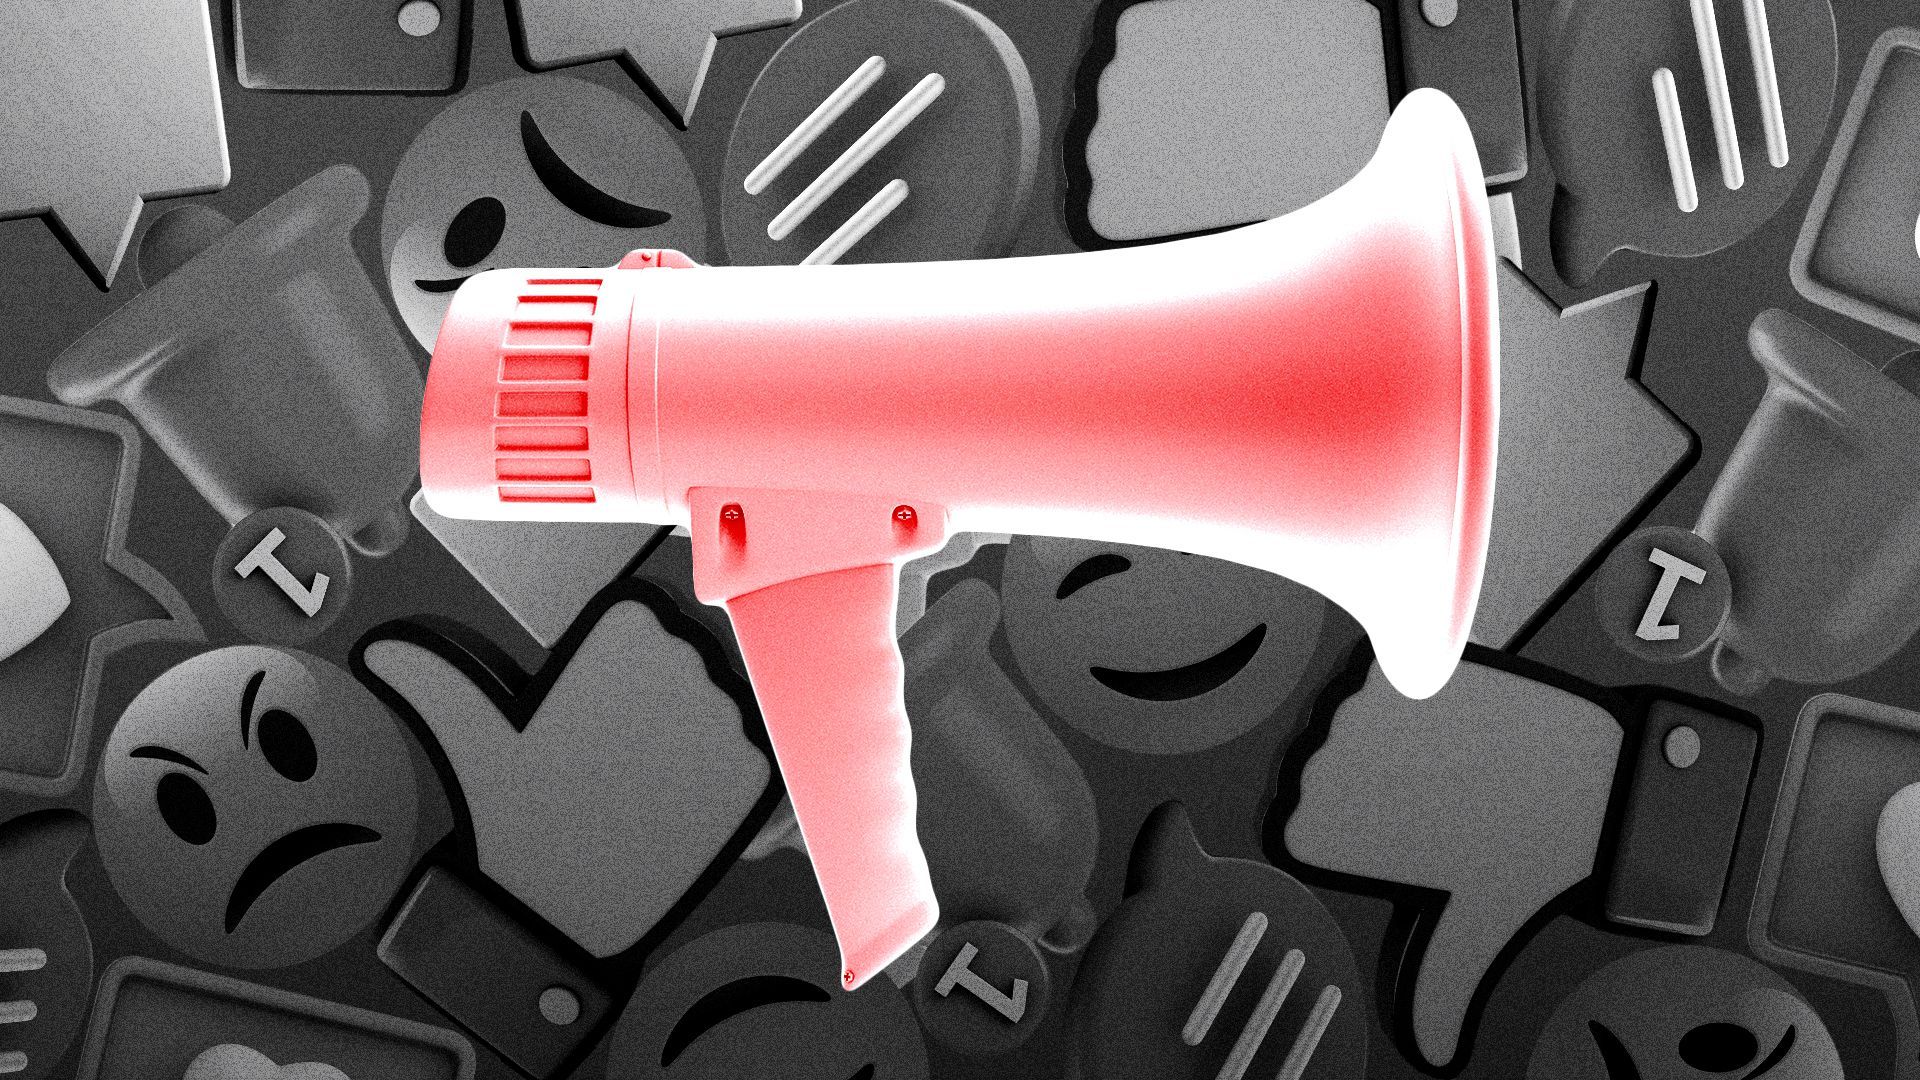 Illustration of a megaphone in front of a busy patterned background showing emojis, social media notification, and text windows